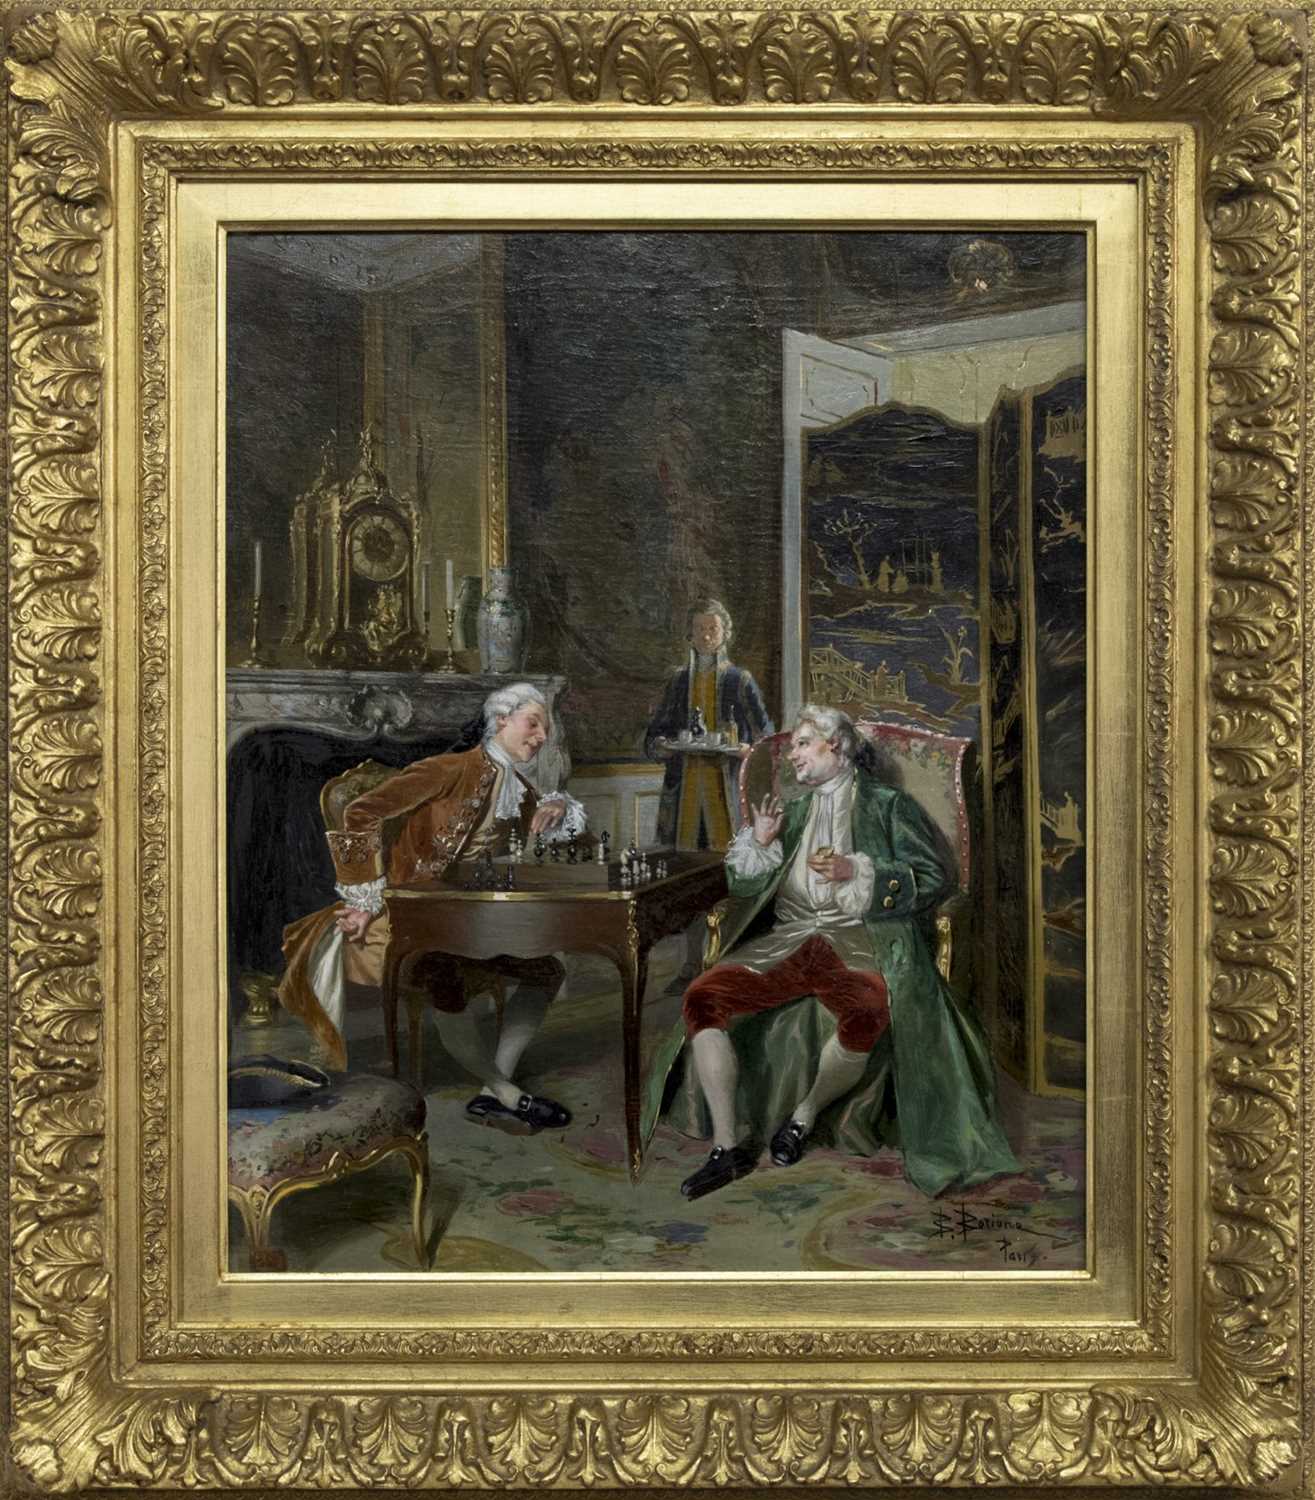 Lot 27 - CHESS PLAYERS, AN OIL BY BERARD-LOUIS BORIONE